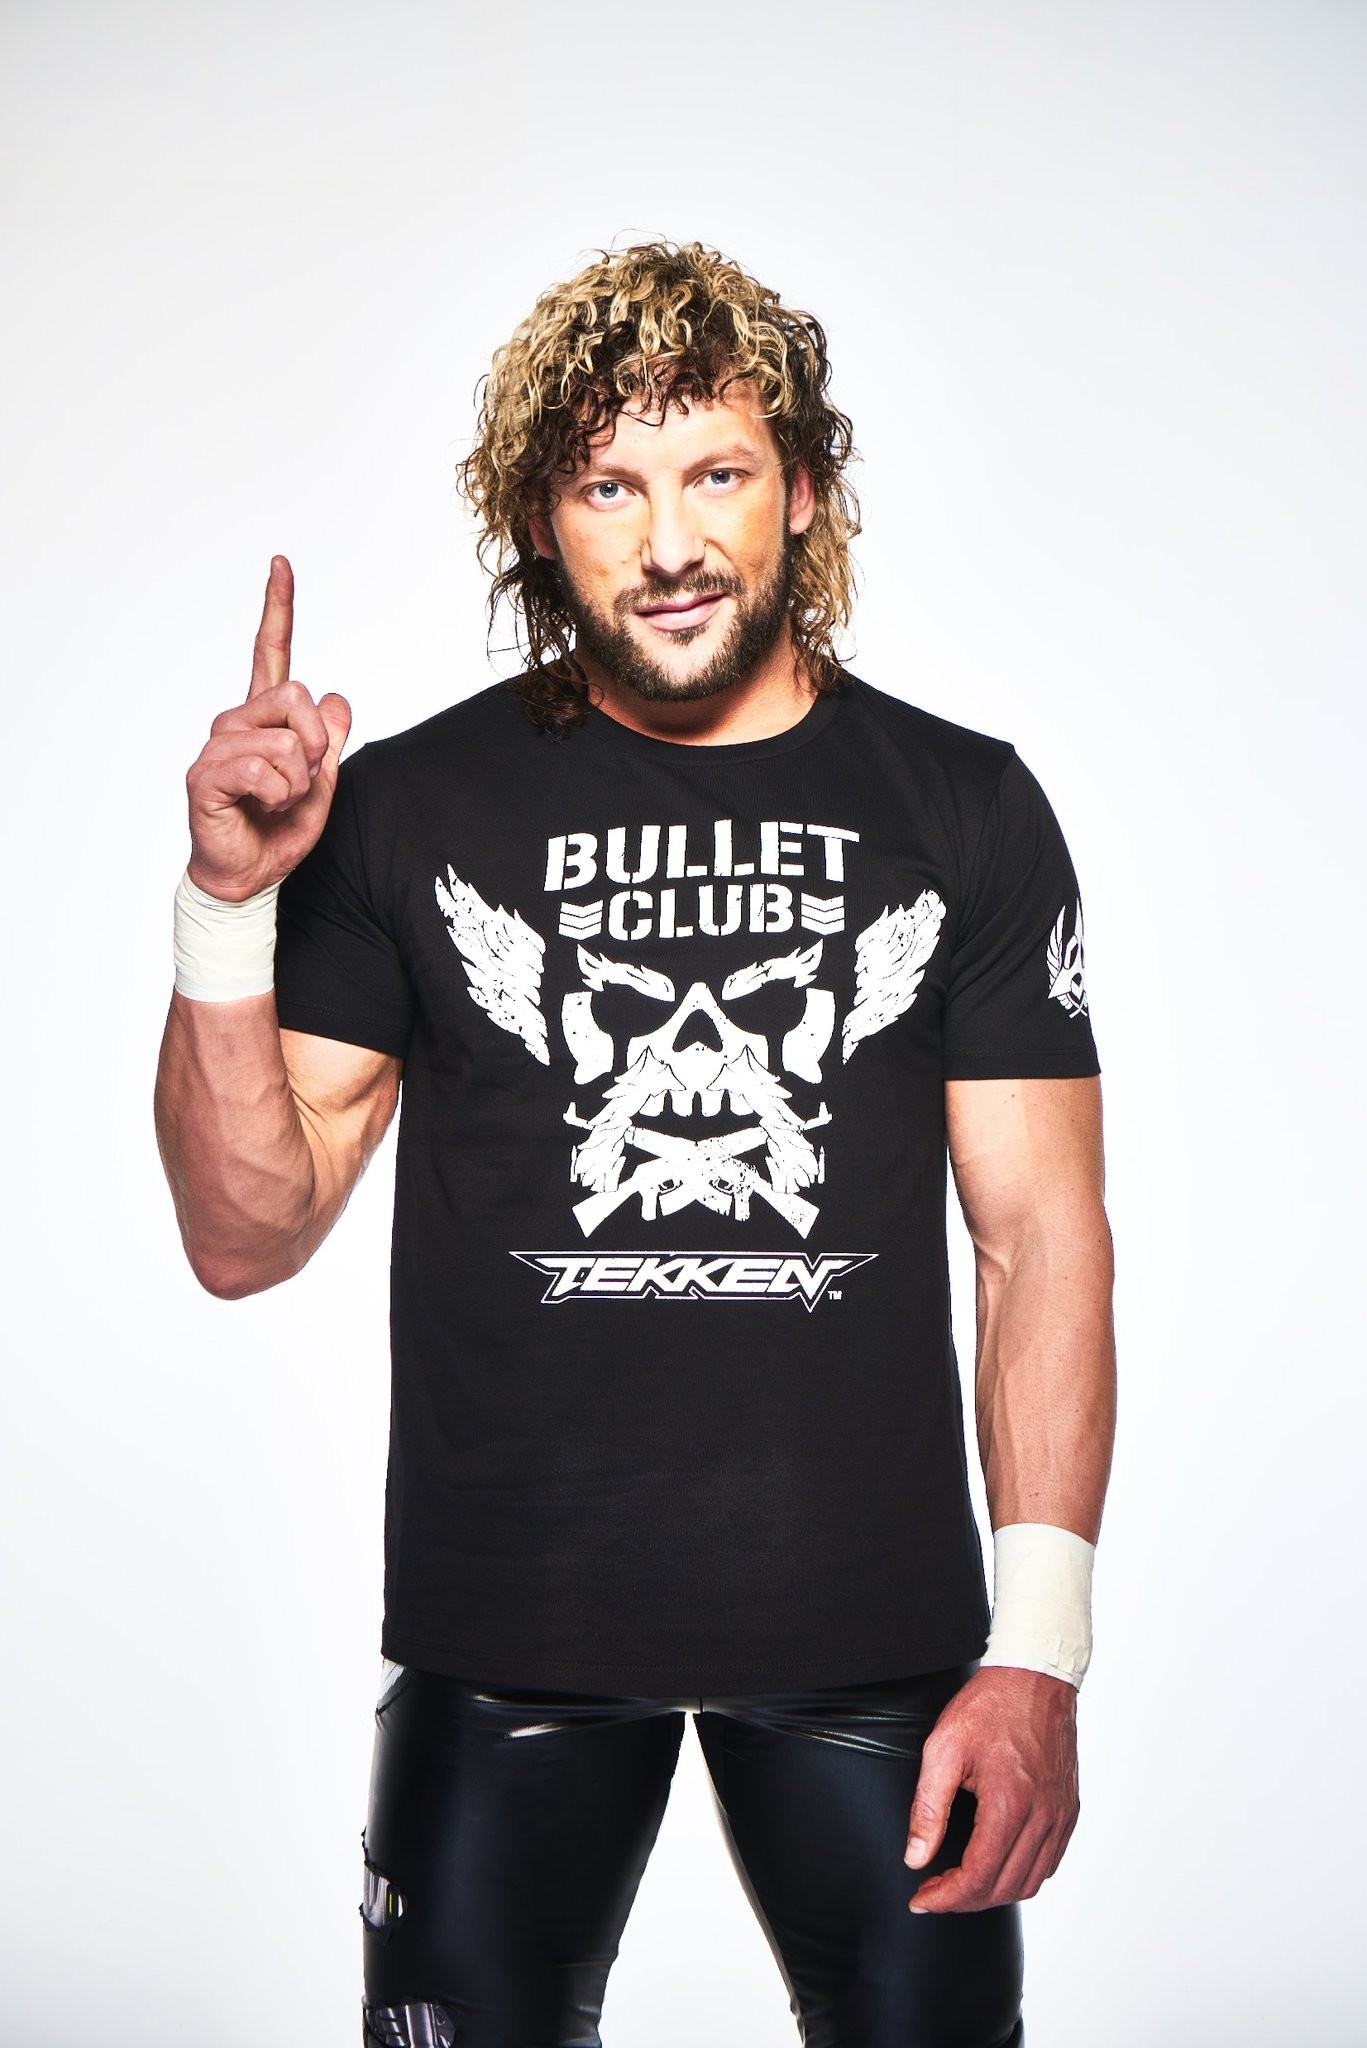 Kenny Omega Wallpapers